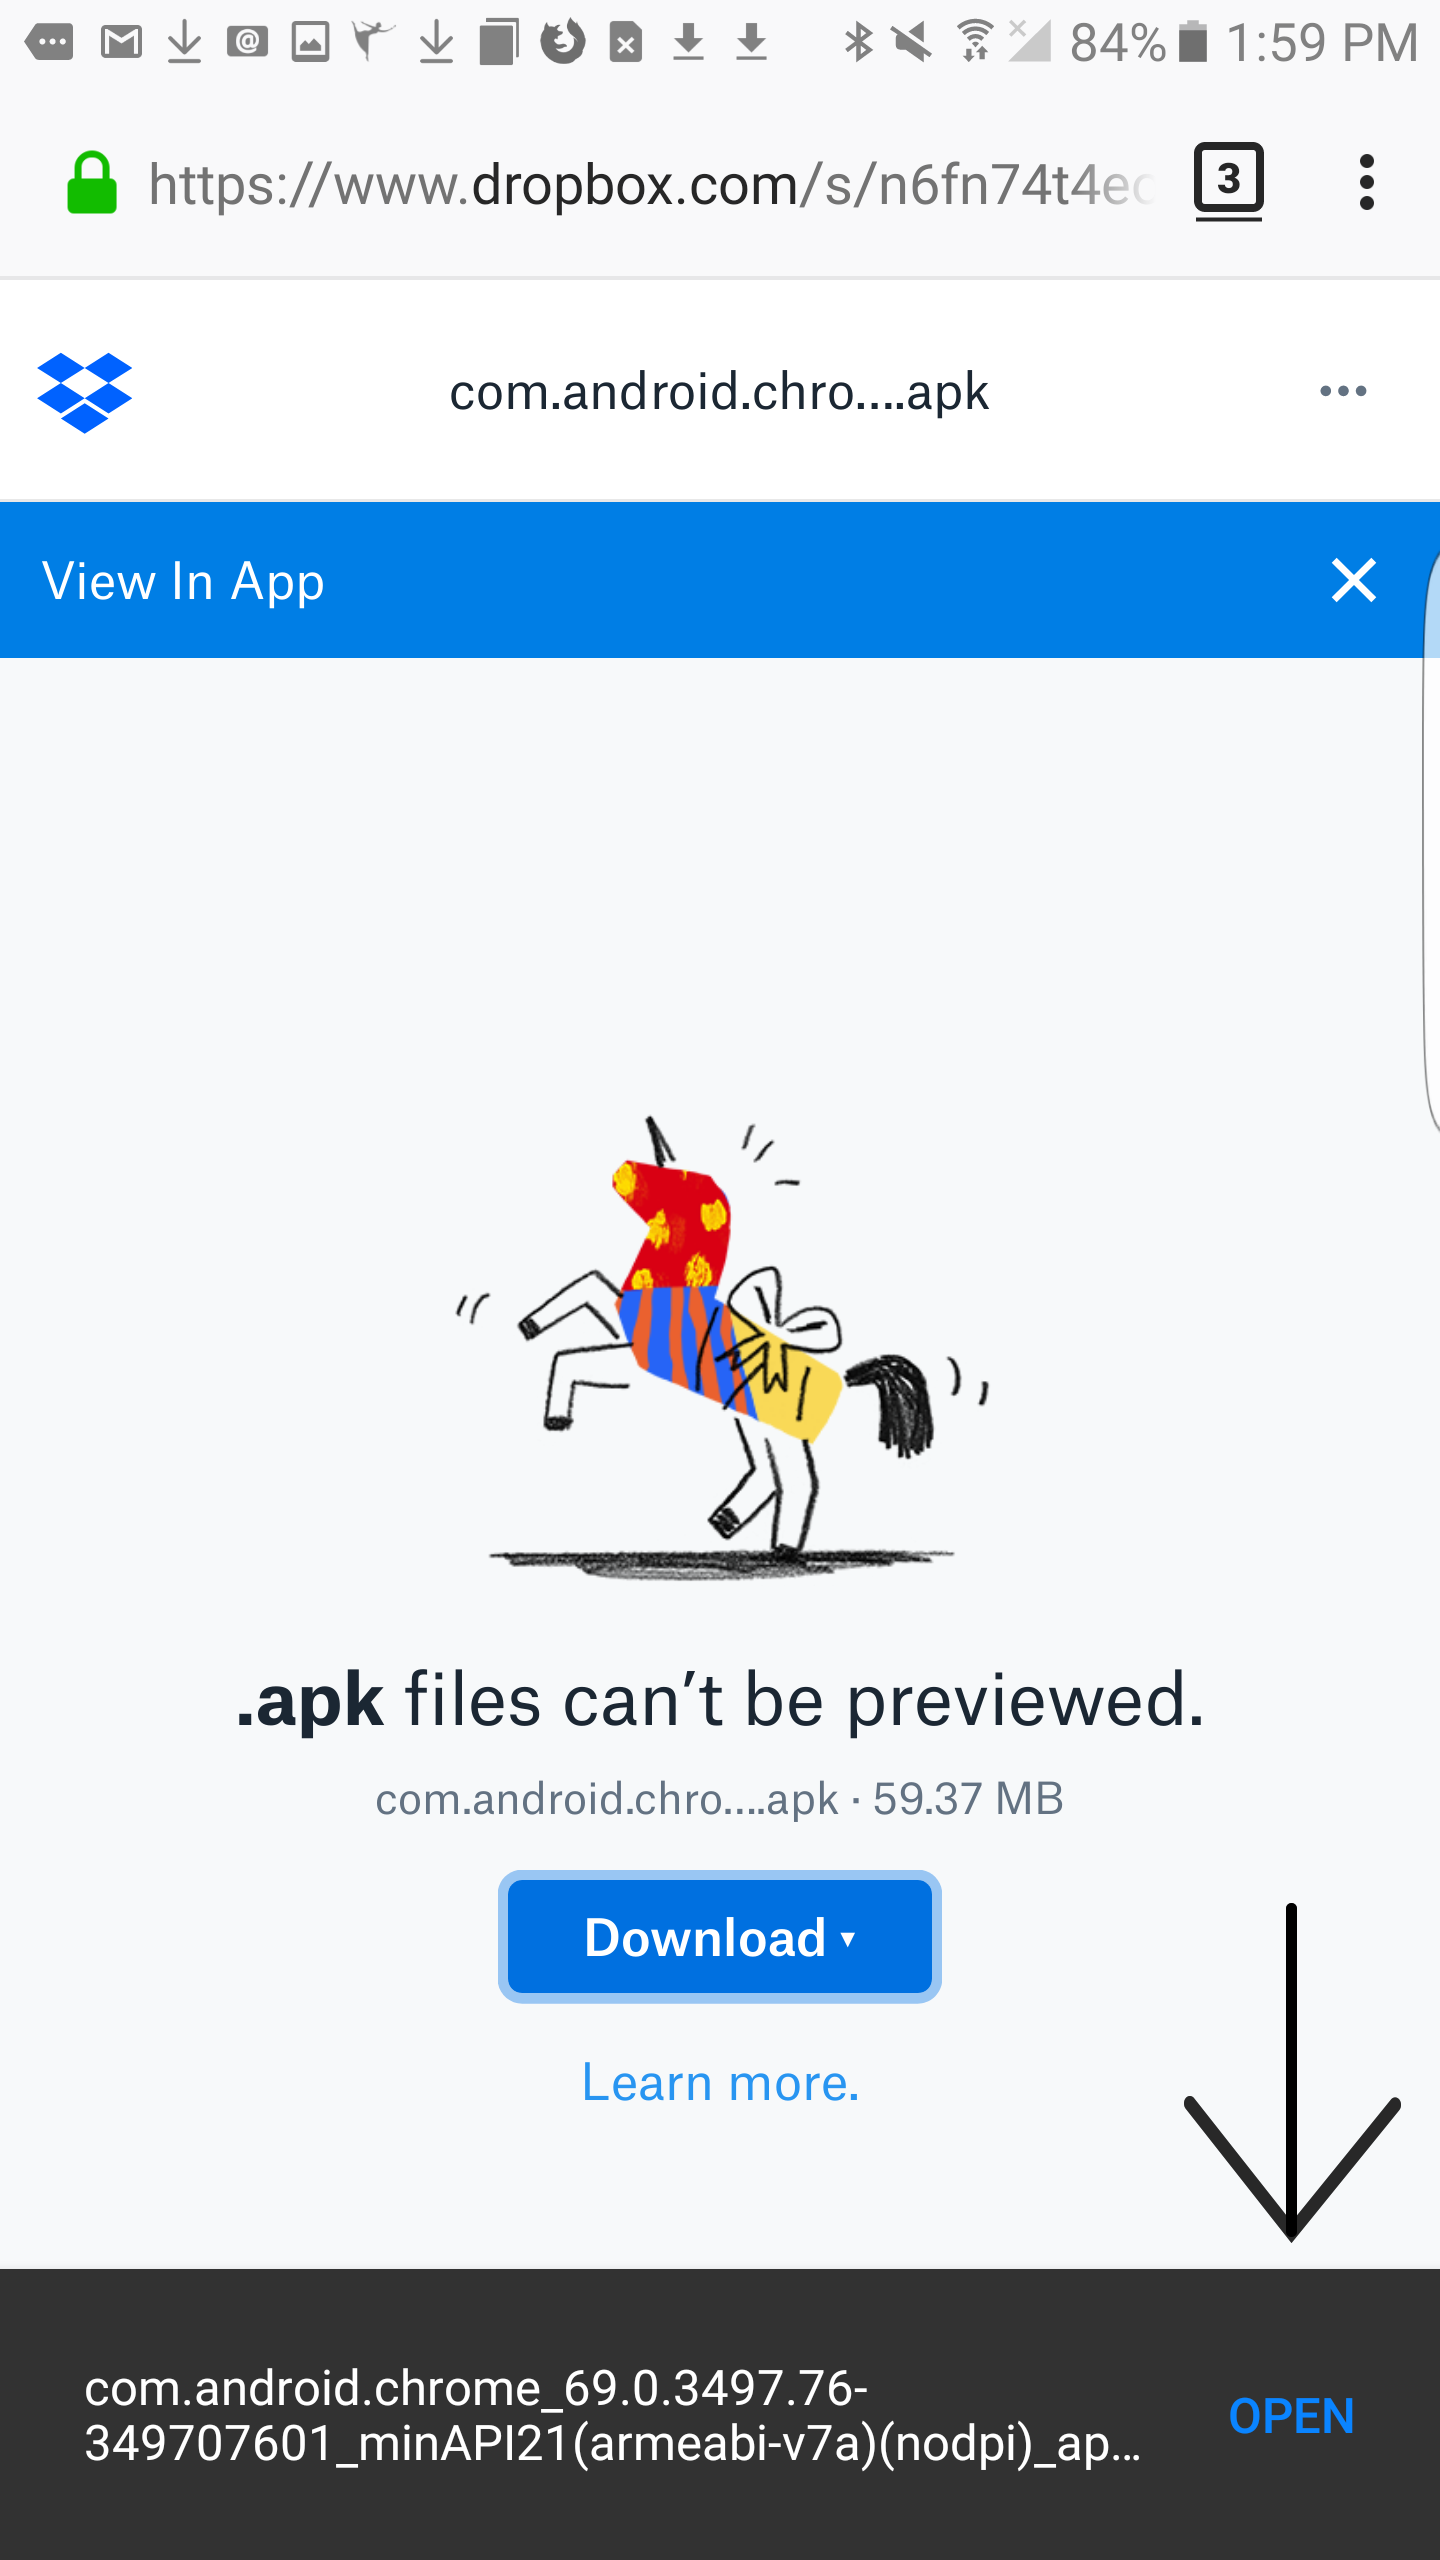 Android chrome doesn